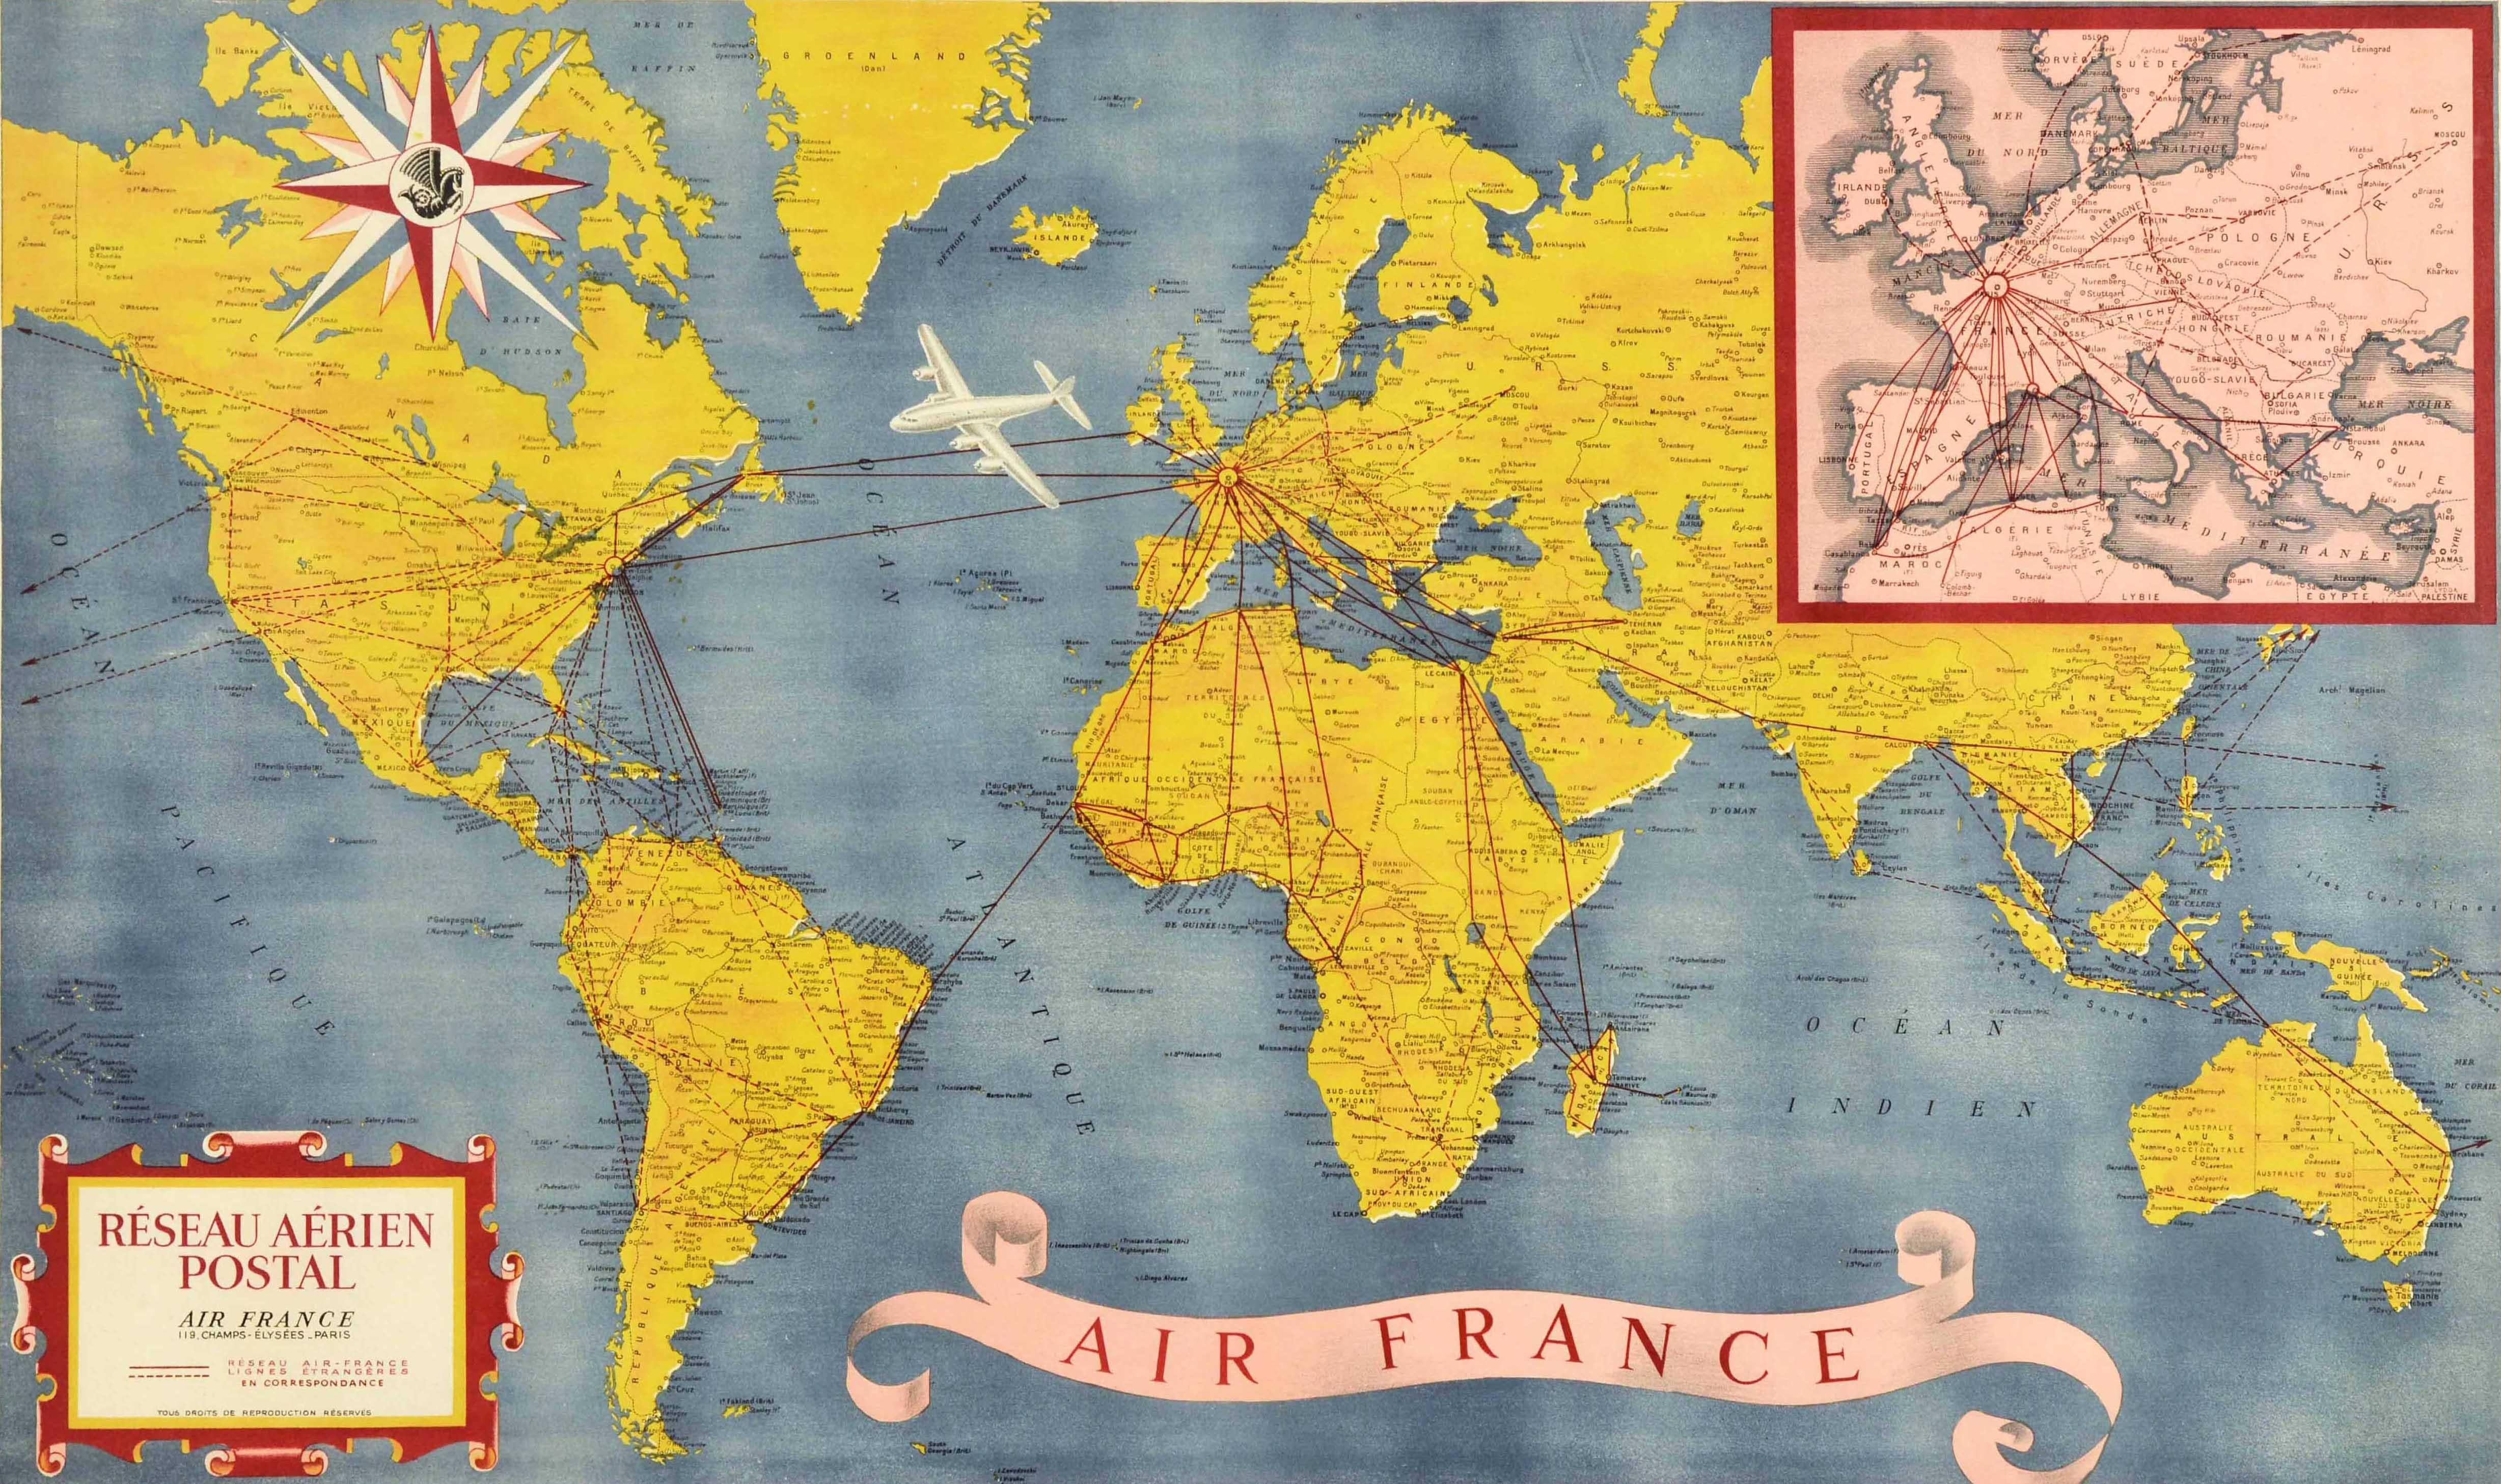 Original Vintage Travel Poster Air France World Map Postal Network Reseau Aerian - Print by Unknown